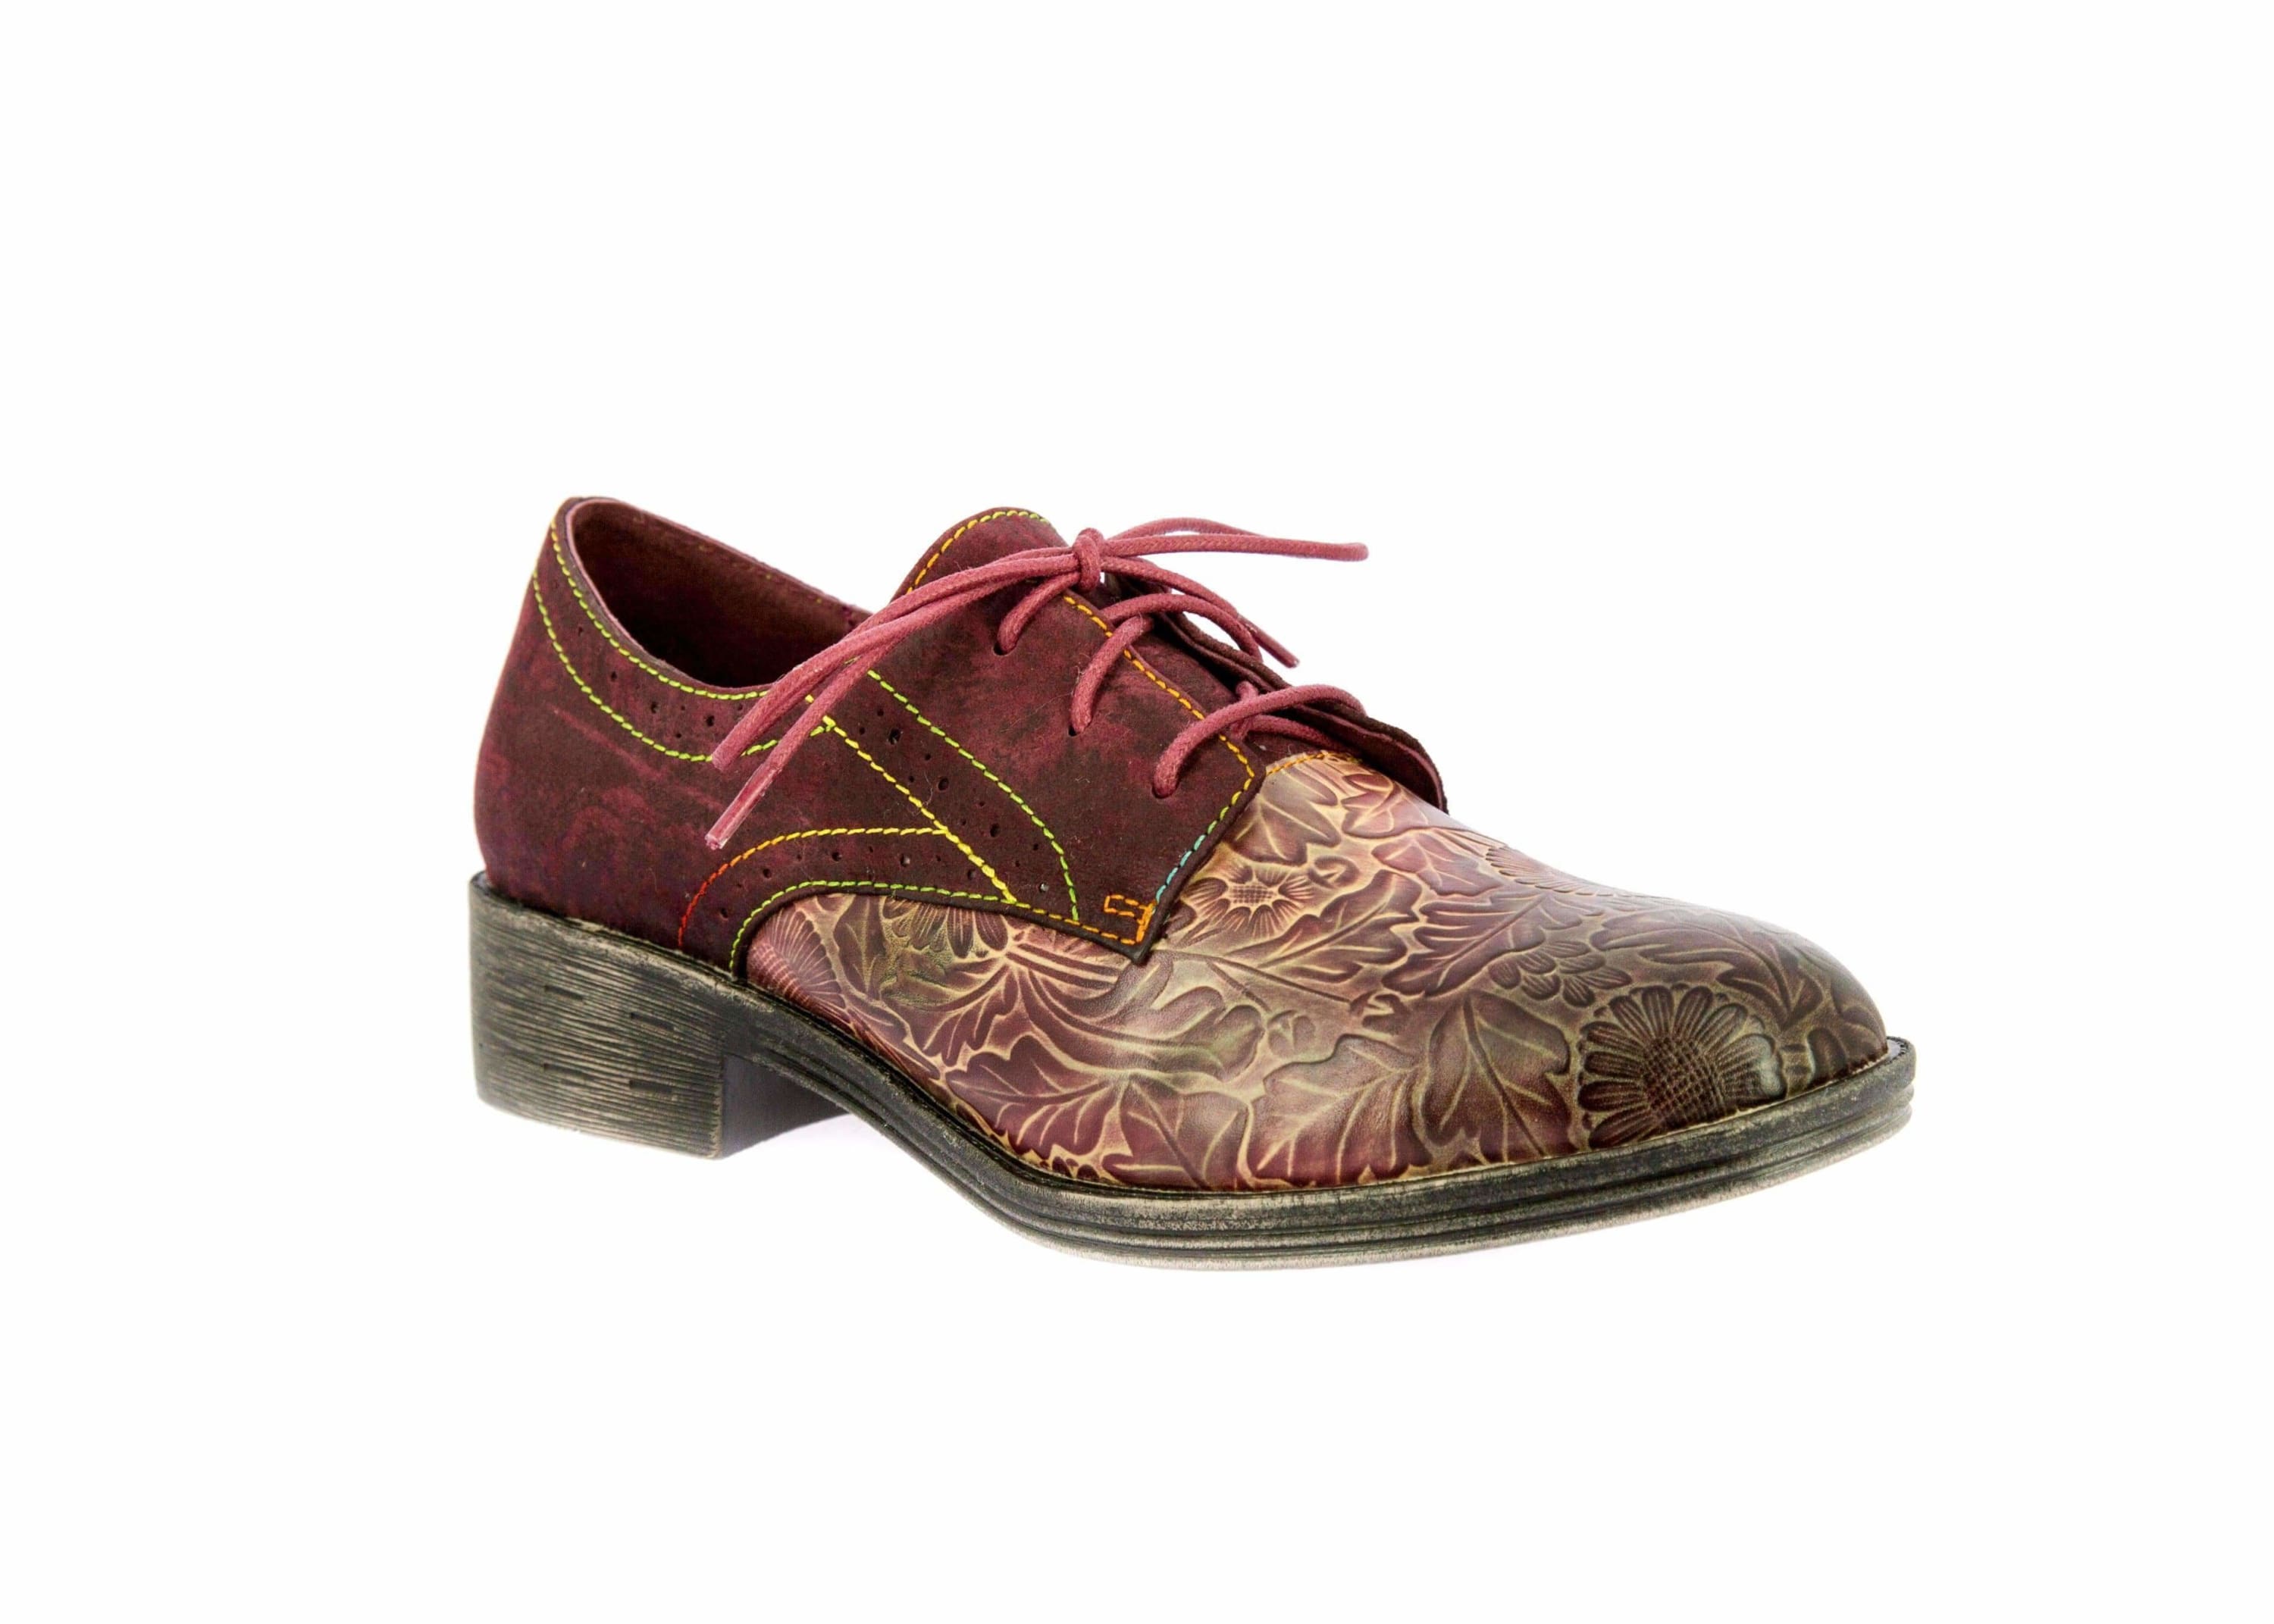 Zapato ESTHER 02 - Derbies